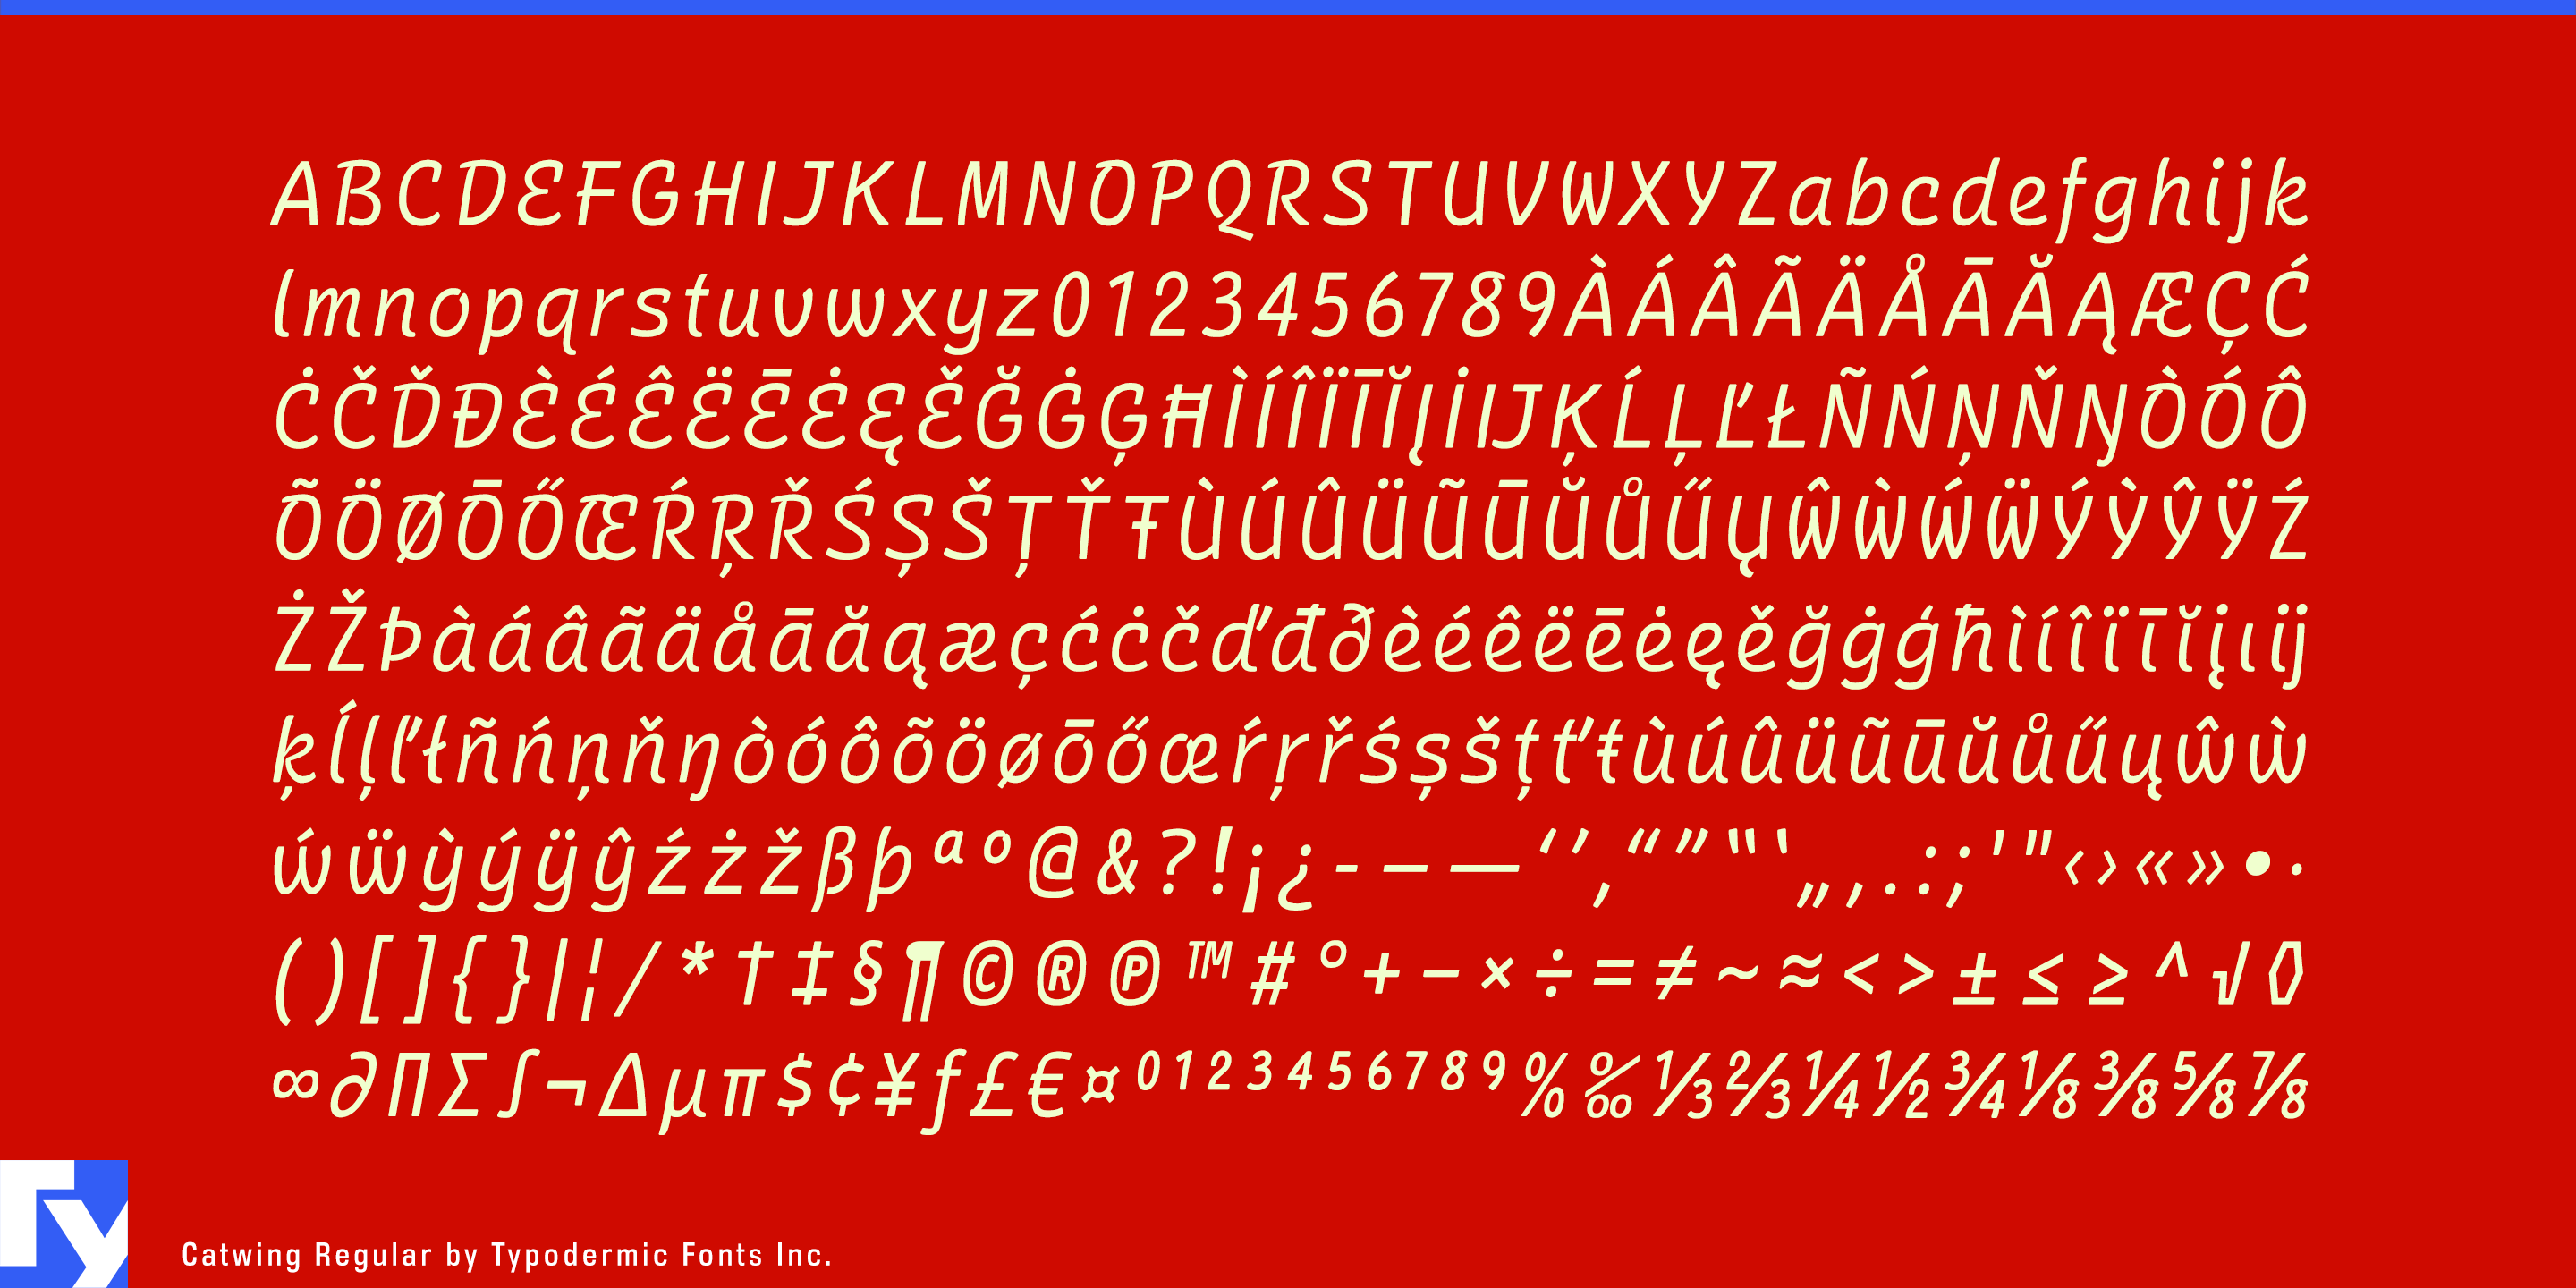 Sleek Lines, Timeless Appeal: Catwing Typeface Takes the Stage